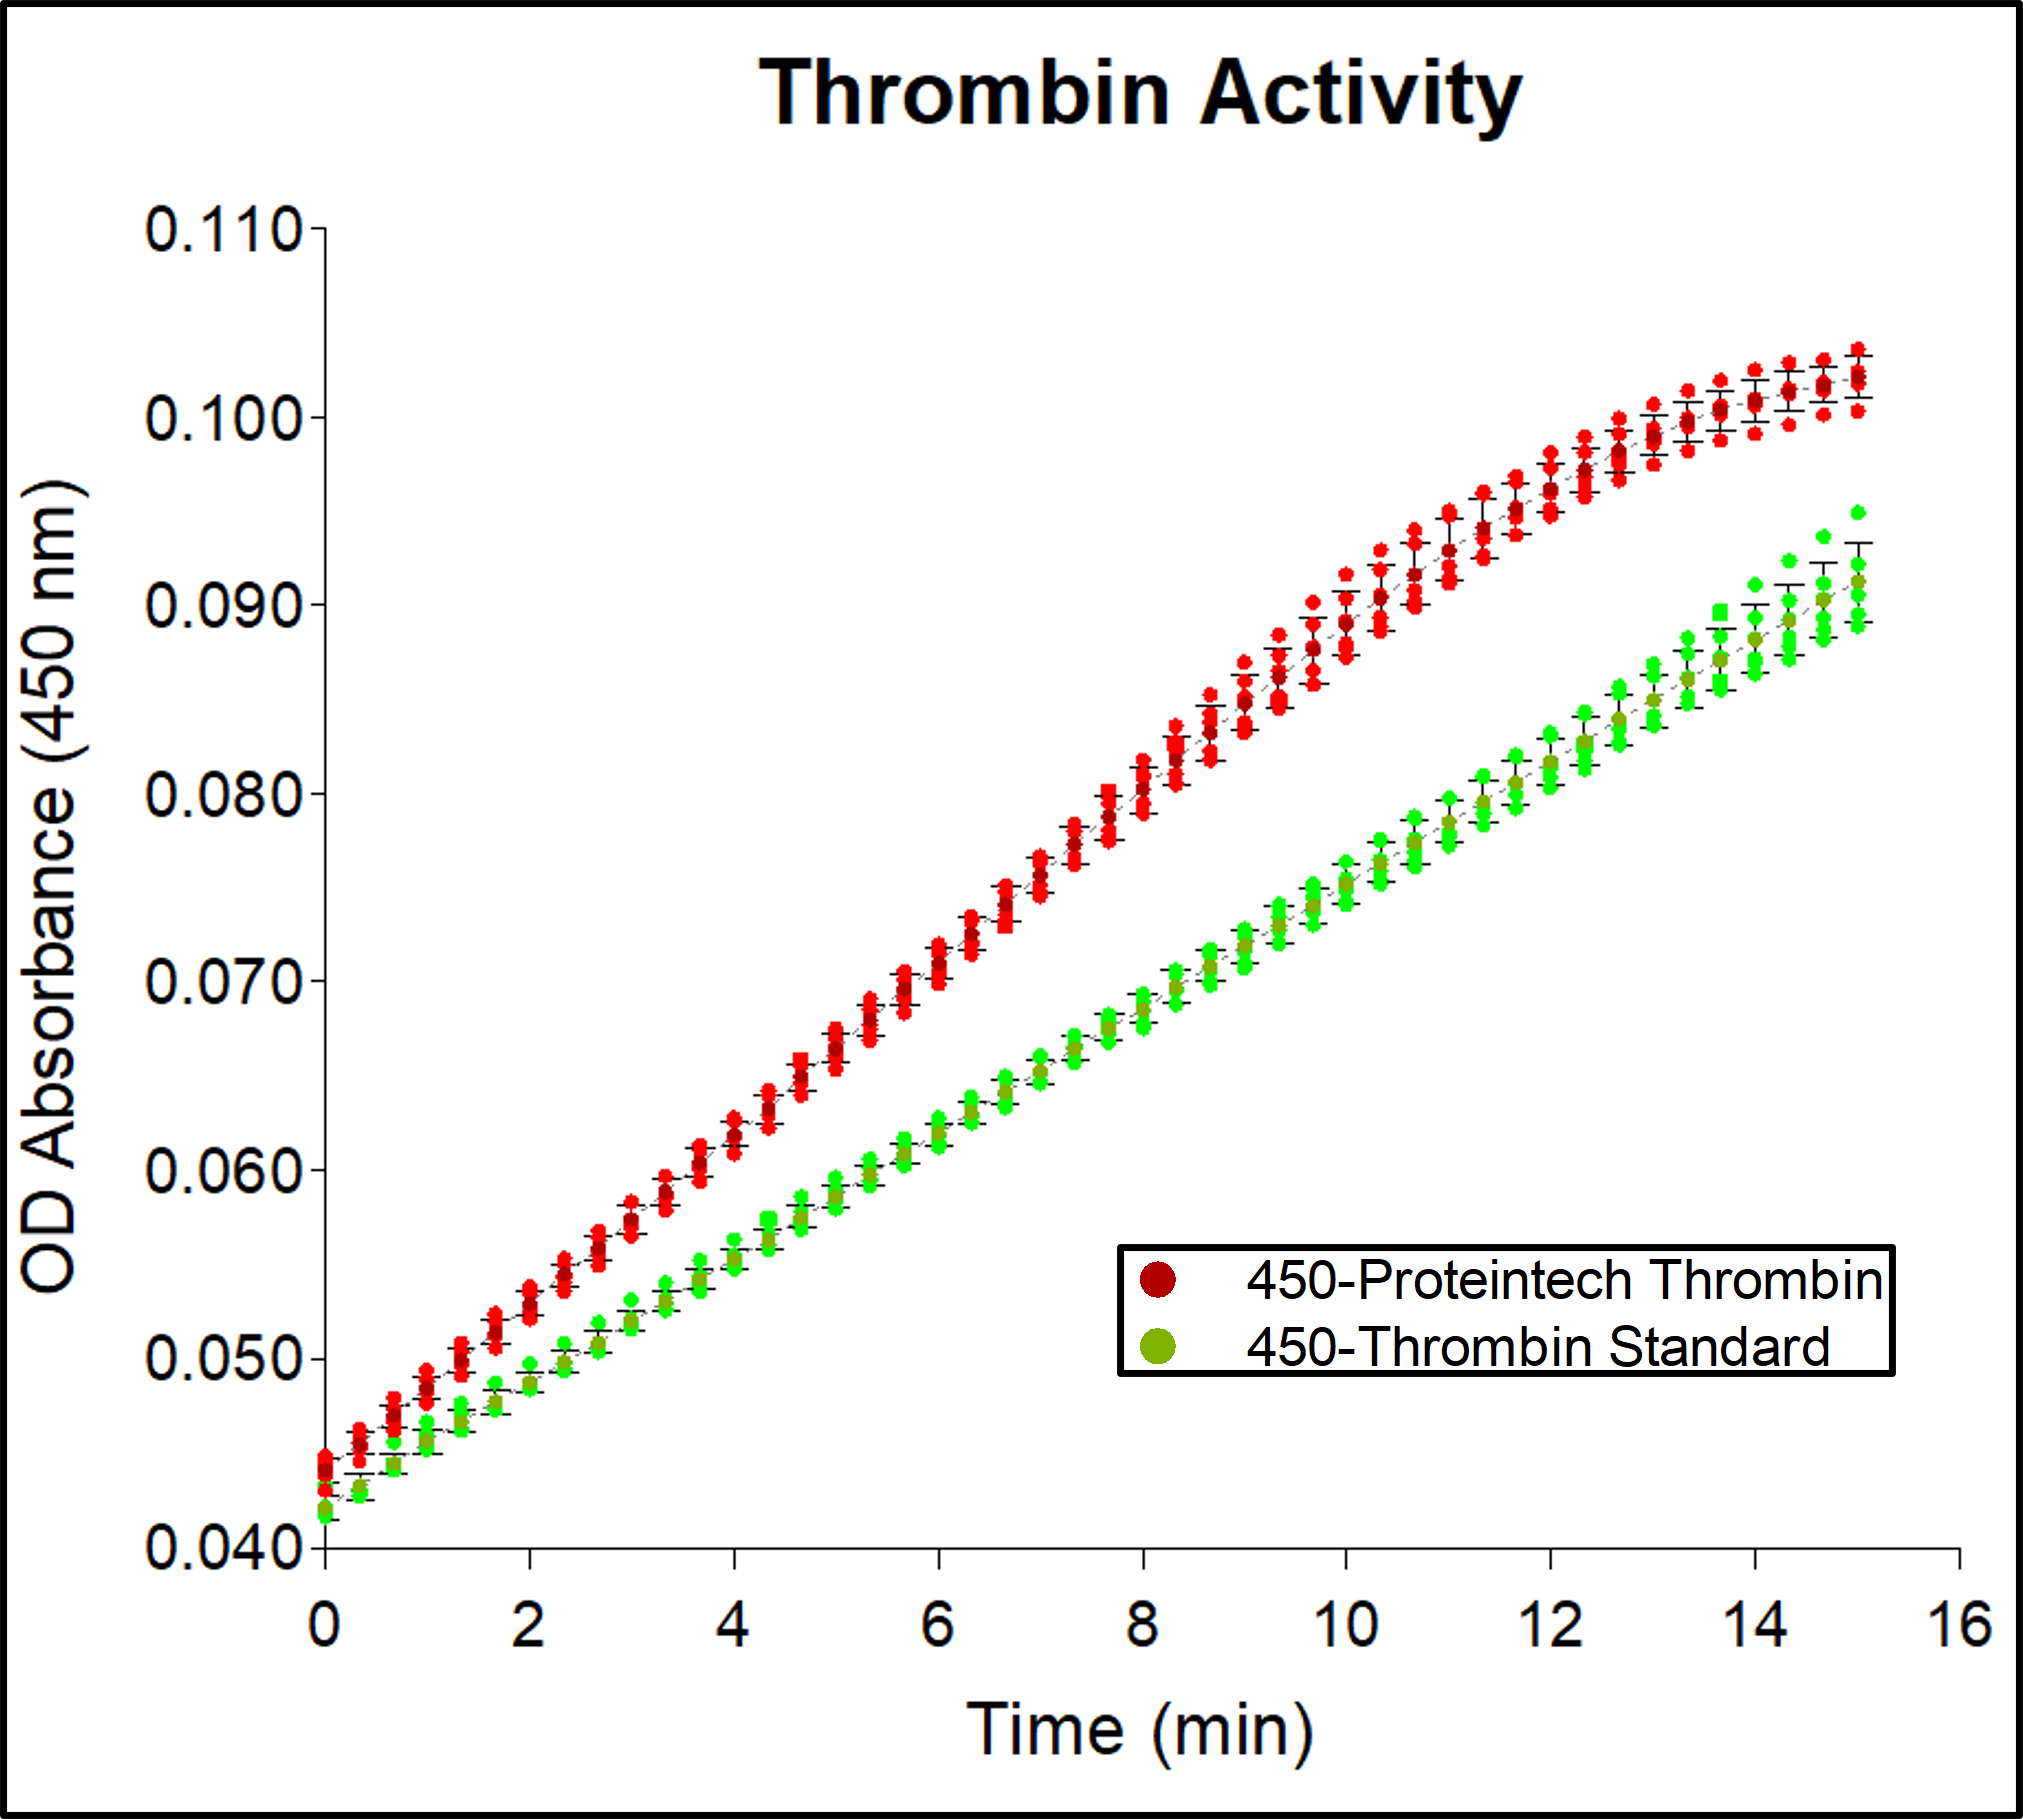 The activity of GMP thrombin (HZ-3010-GMP) was measured by the rate of free chromophore formation from Chromozym TH thrombin substrate monitored by absorbance at 405 nm. The enzymatic reaction was carried out in 50mM Tris-HCl pH 8.3 buffer containing 0.1% BSA and 227 mM NaCl at 25°C.  Activity ranges from 1000-5000 units/mg. 